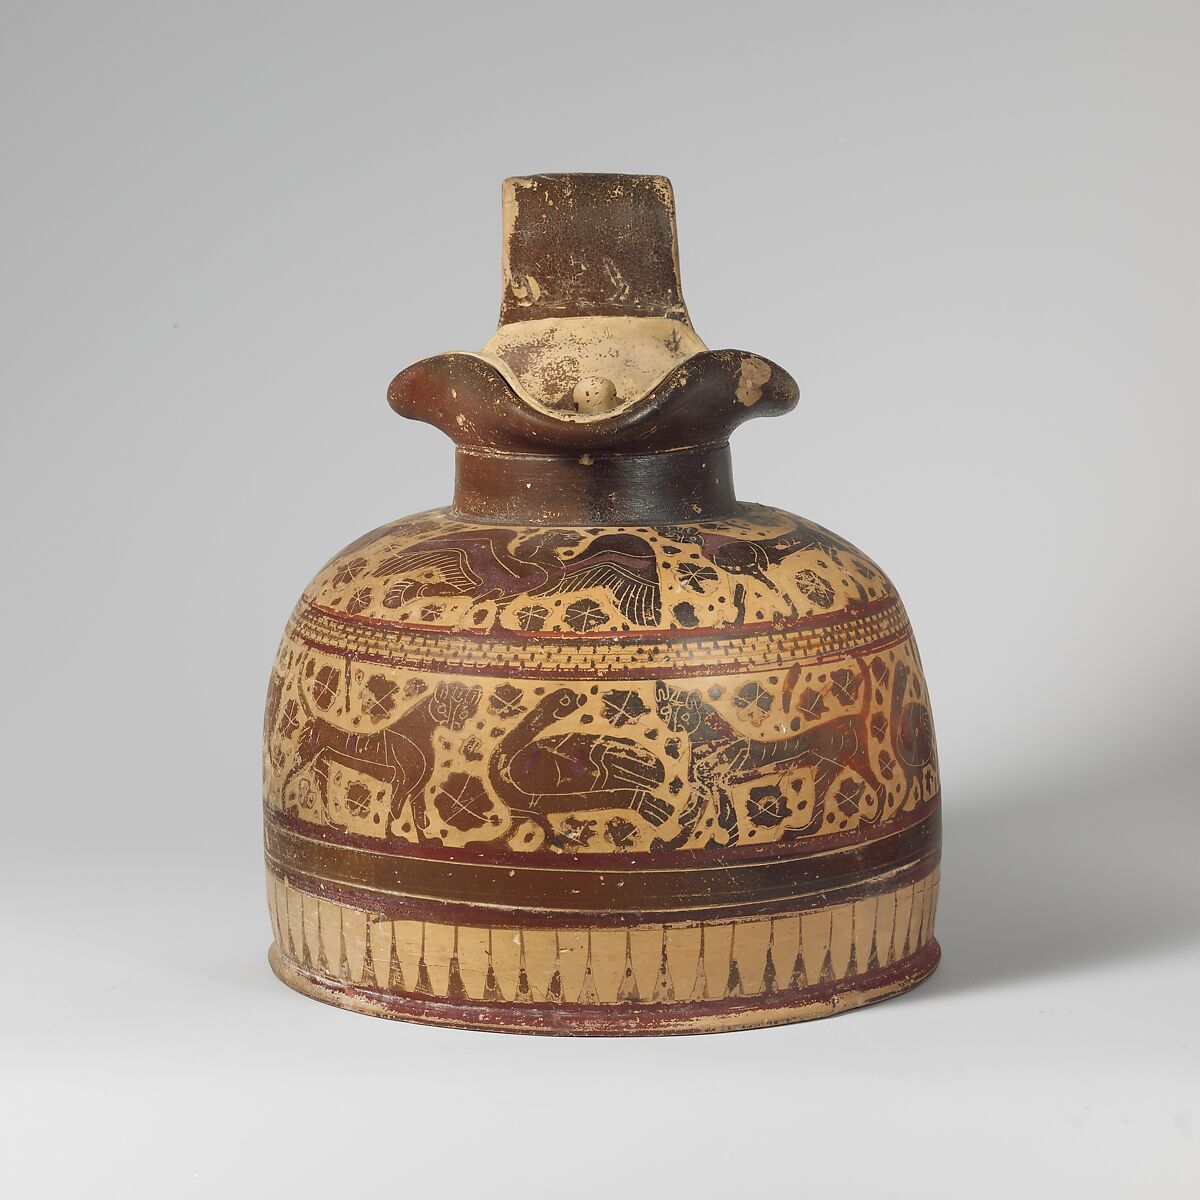 Terracotta oinochoe (jug) with lid, Attributed to the Canessa Painter, Terracotta, Greek, Corinthian 